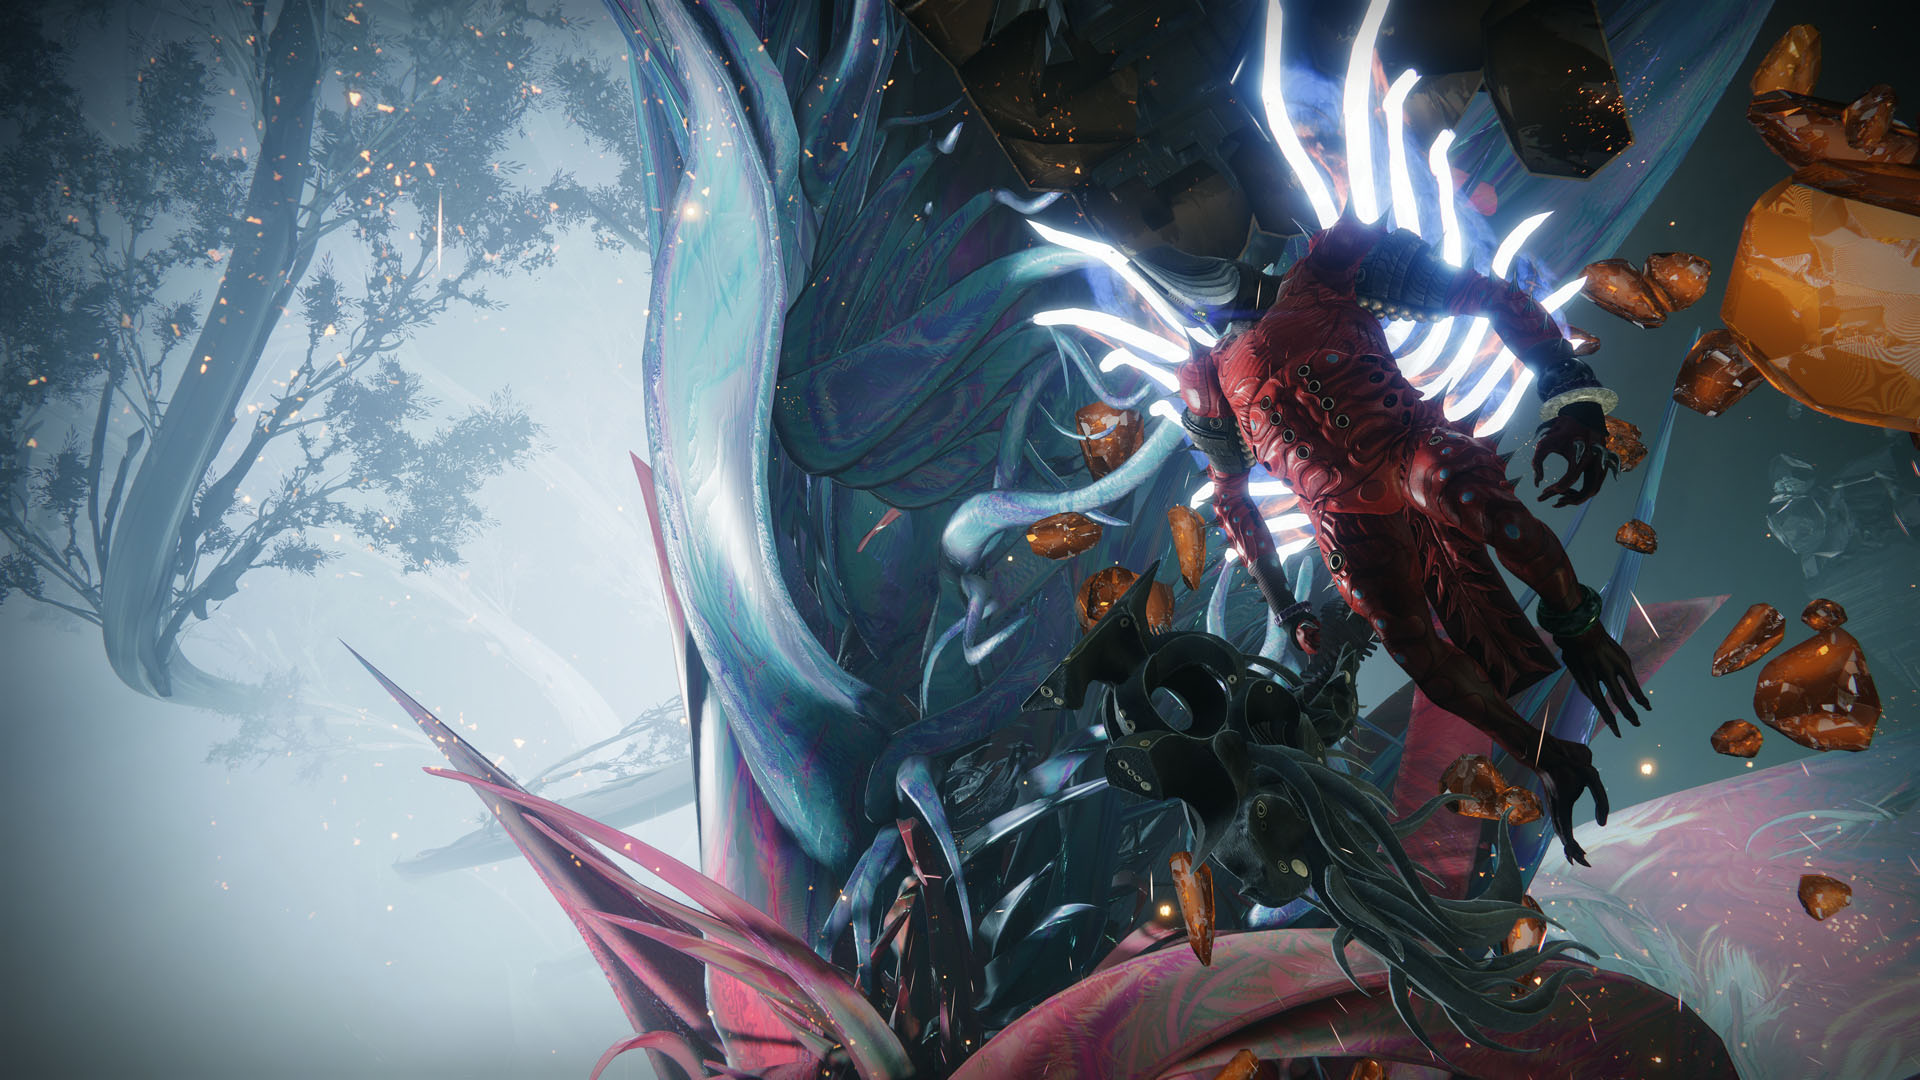 Destiny 2 Player Sets Record With Root Of Nightmares Solo Flawless Raid Completion In 38 Minutes